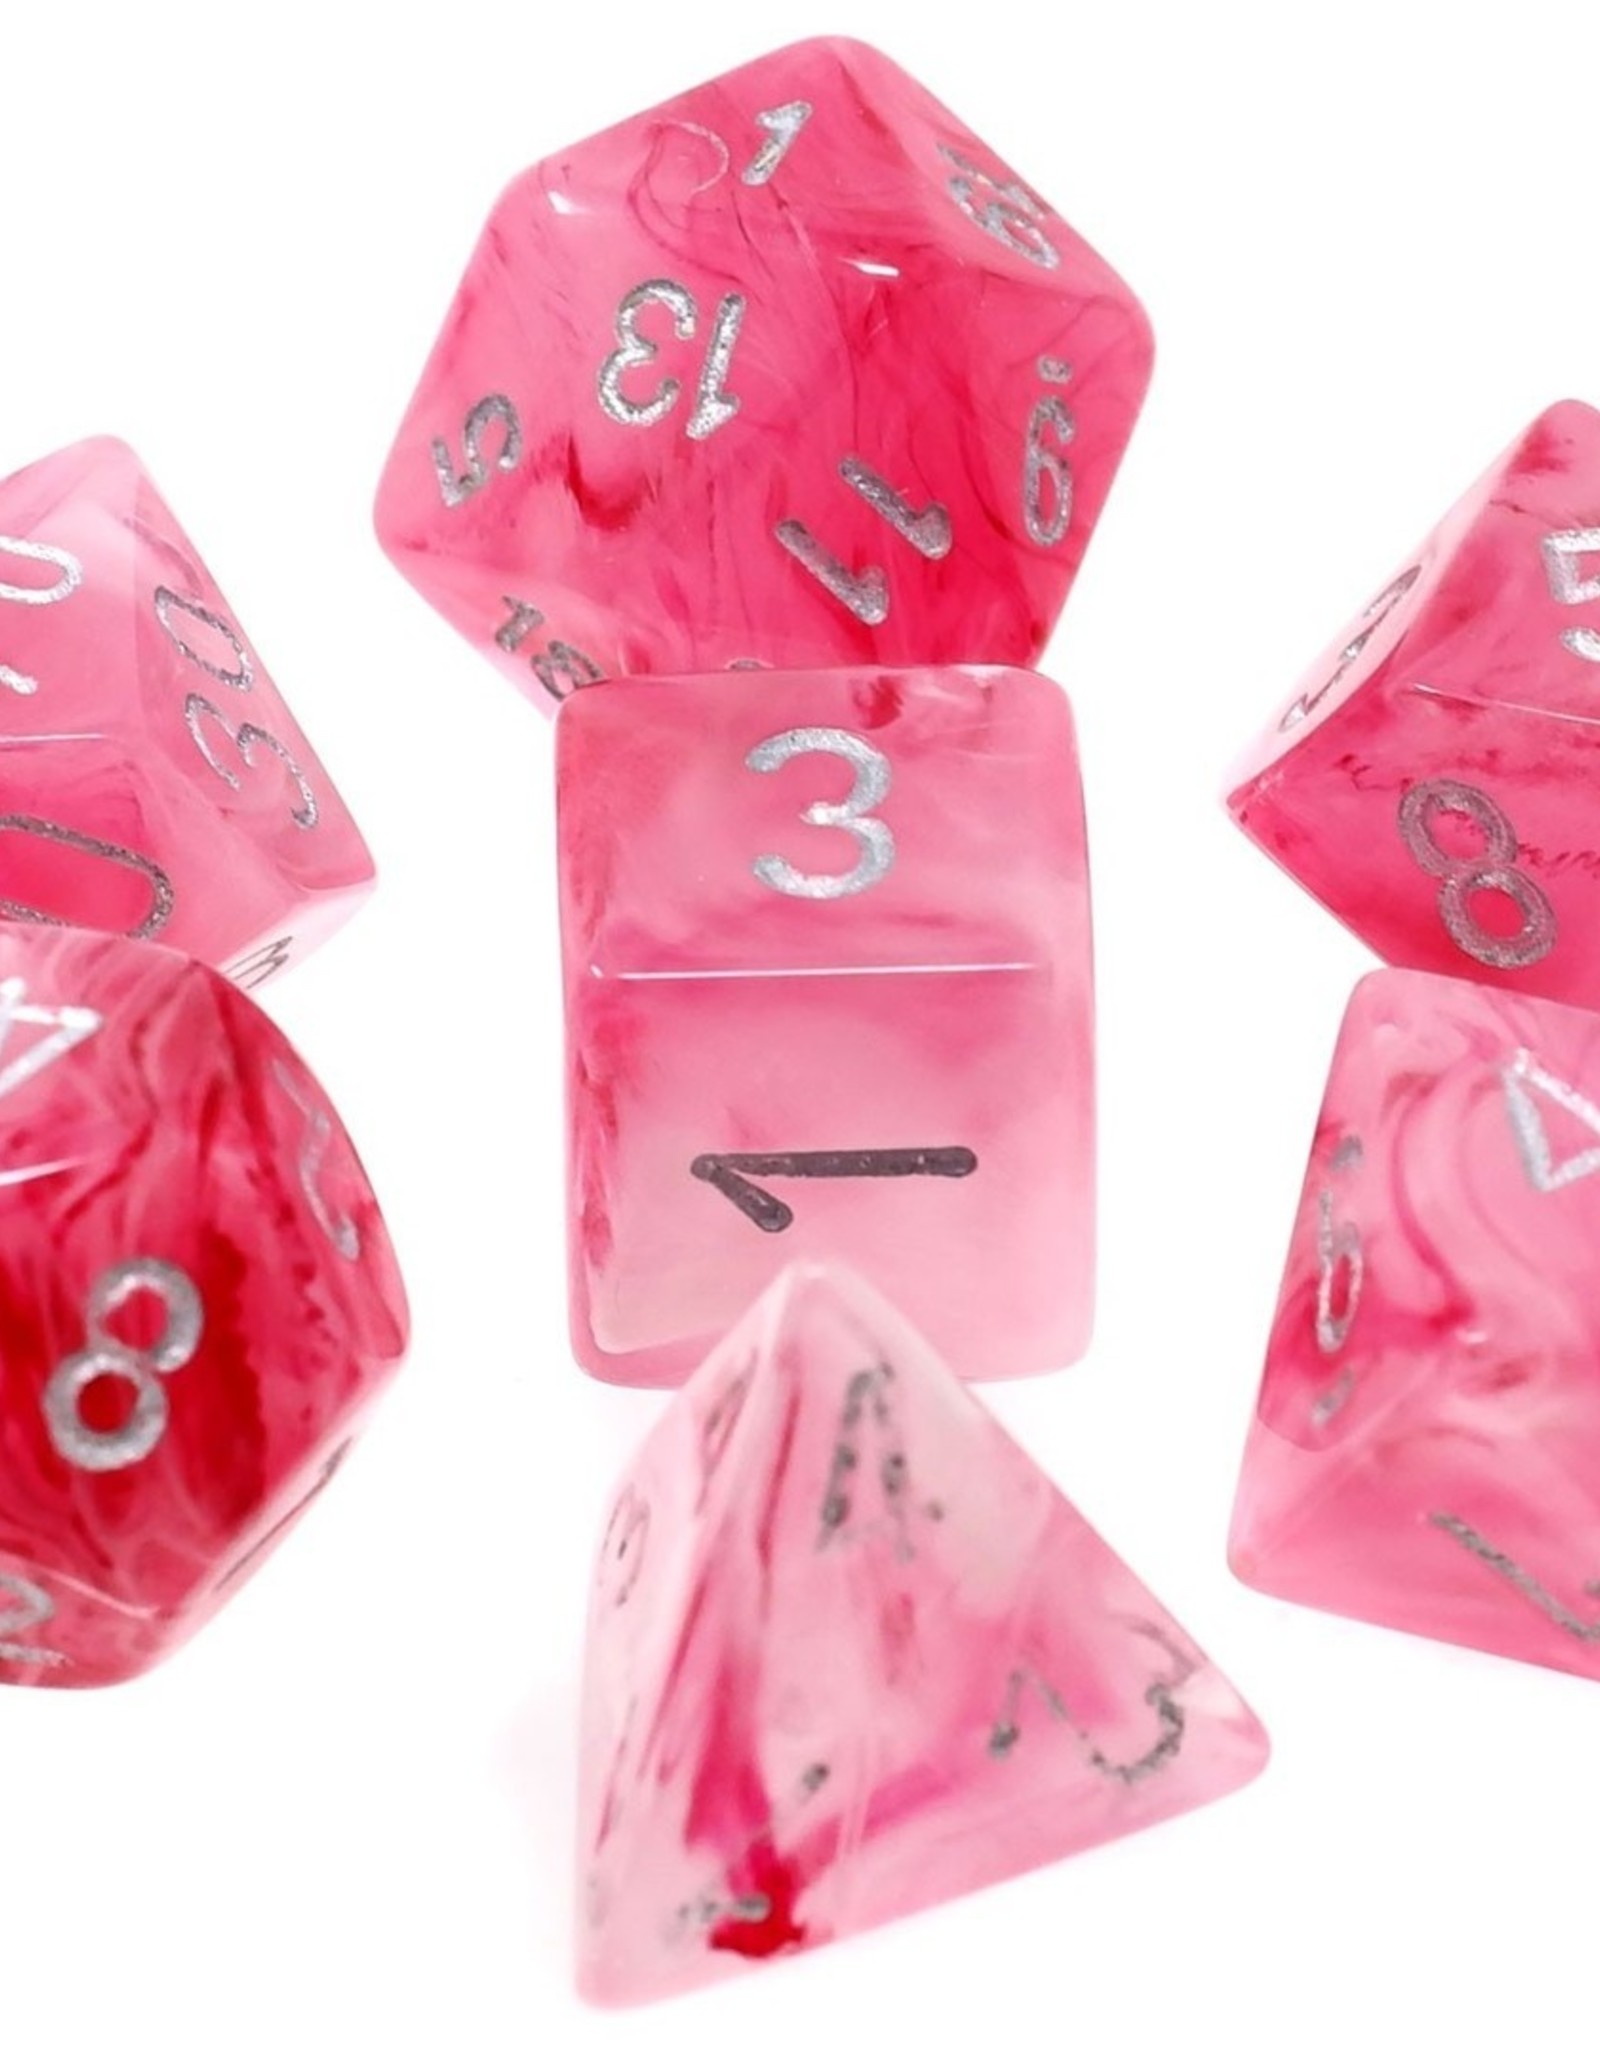 Chessex Chessex 7-Die set Ghostly Glow - Pink/Silver